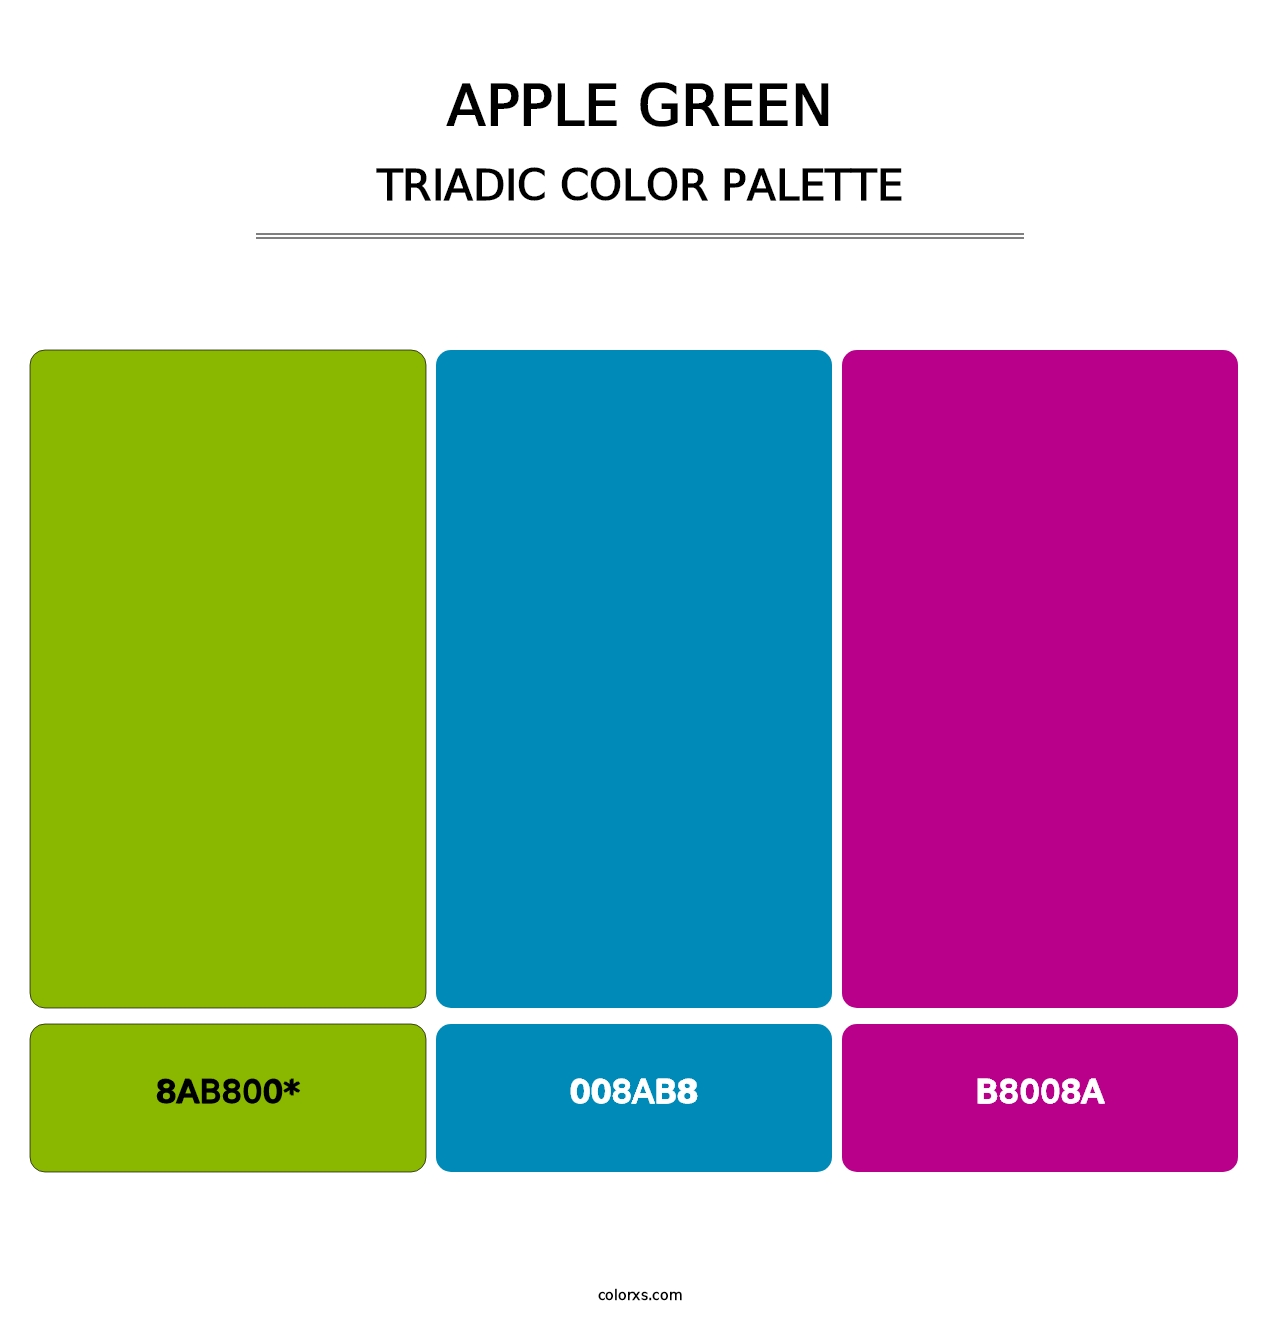 Apple Green - Triadic Color Palette